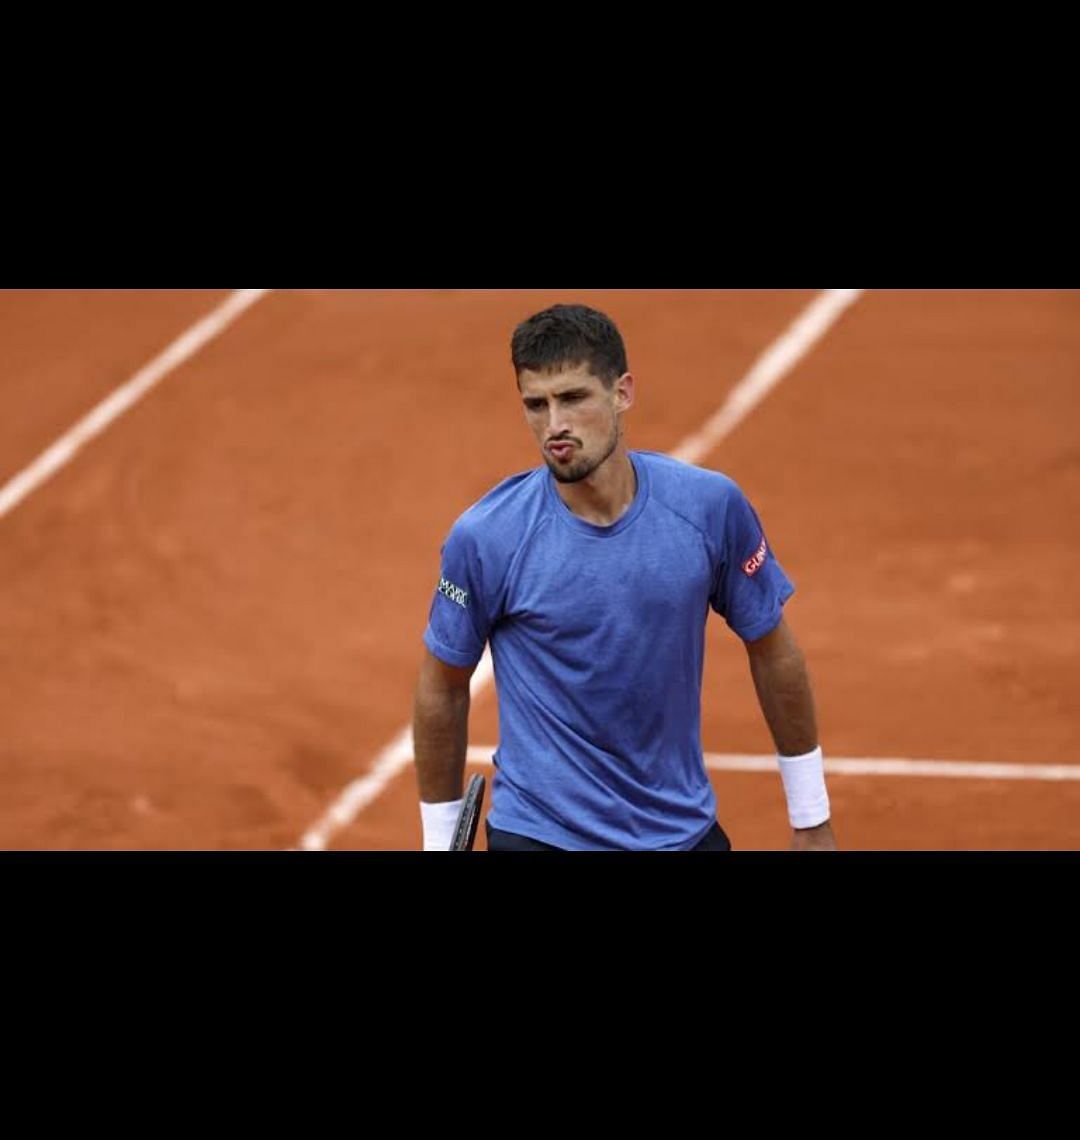 Cachin won his maiden ATP title in Gstaad on Sunday